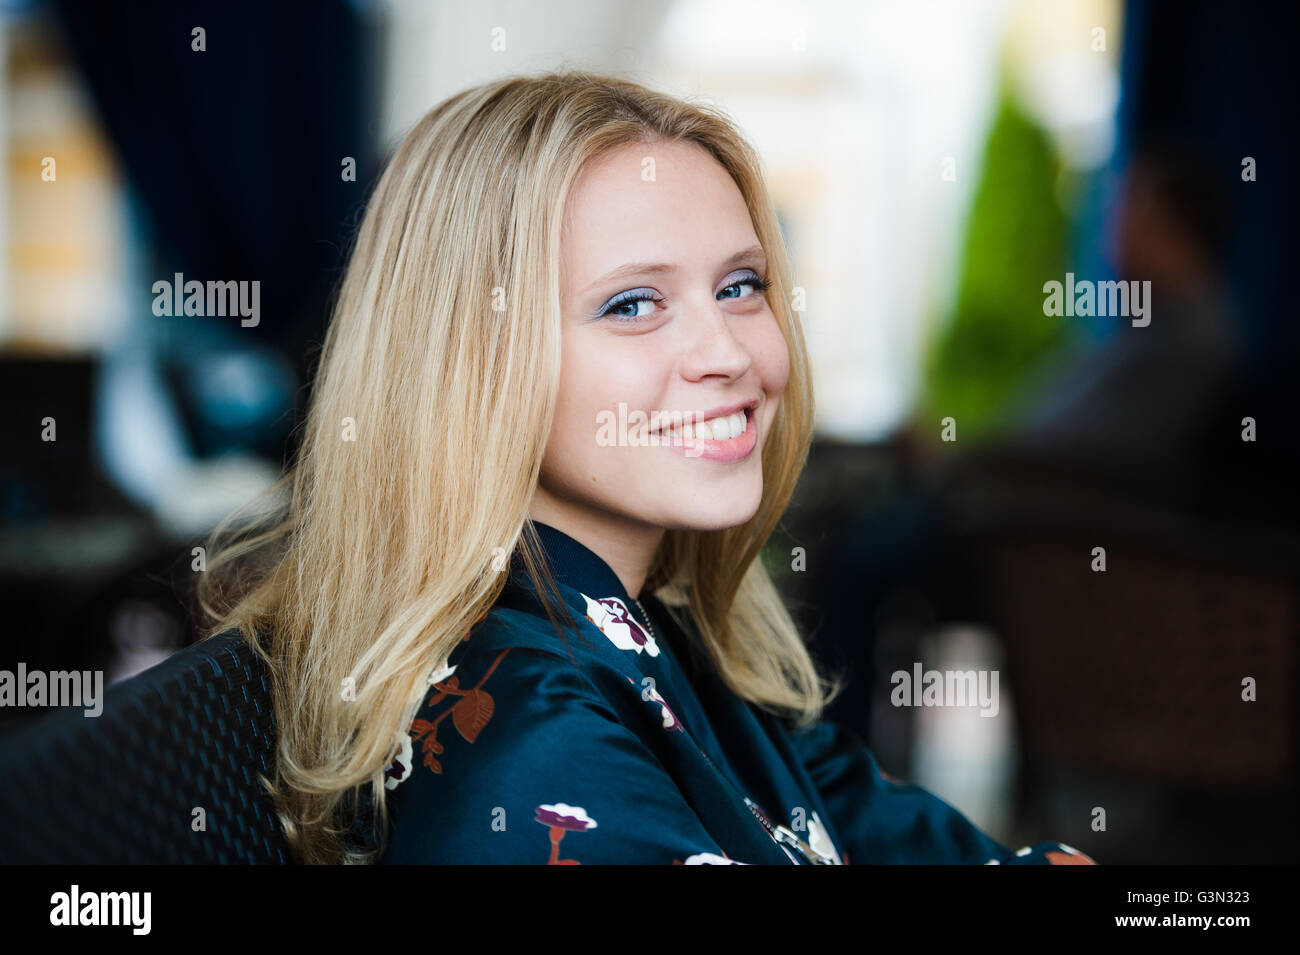 Close up portrait of a young woman's smiling face with outdoors cafe blurred background. Stock Photo